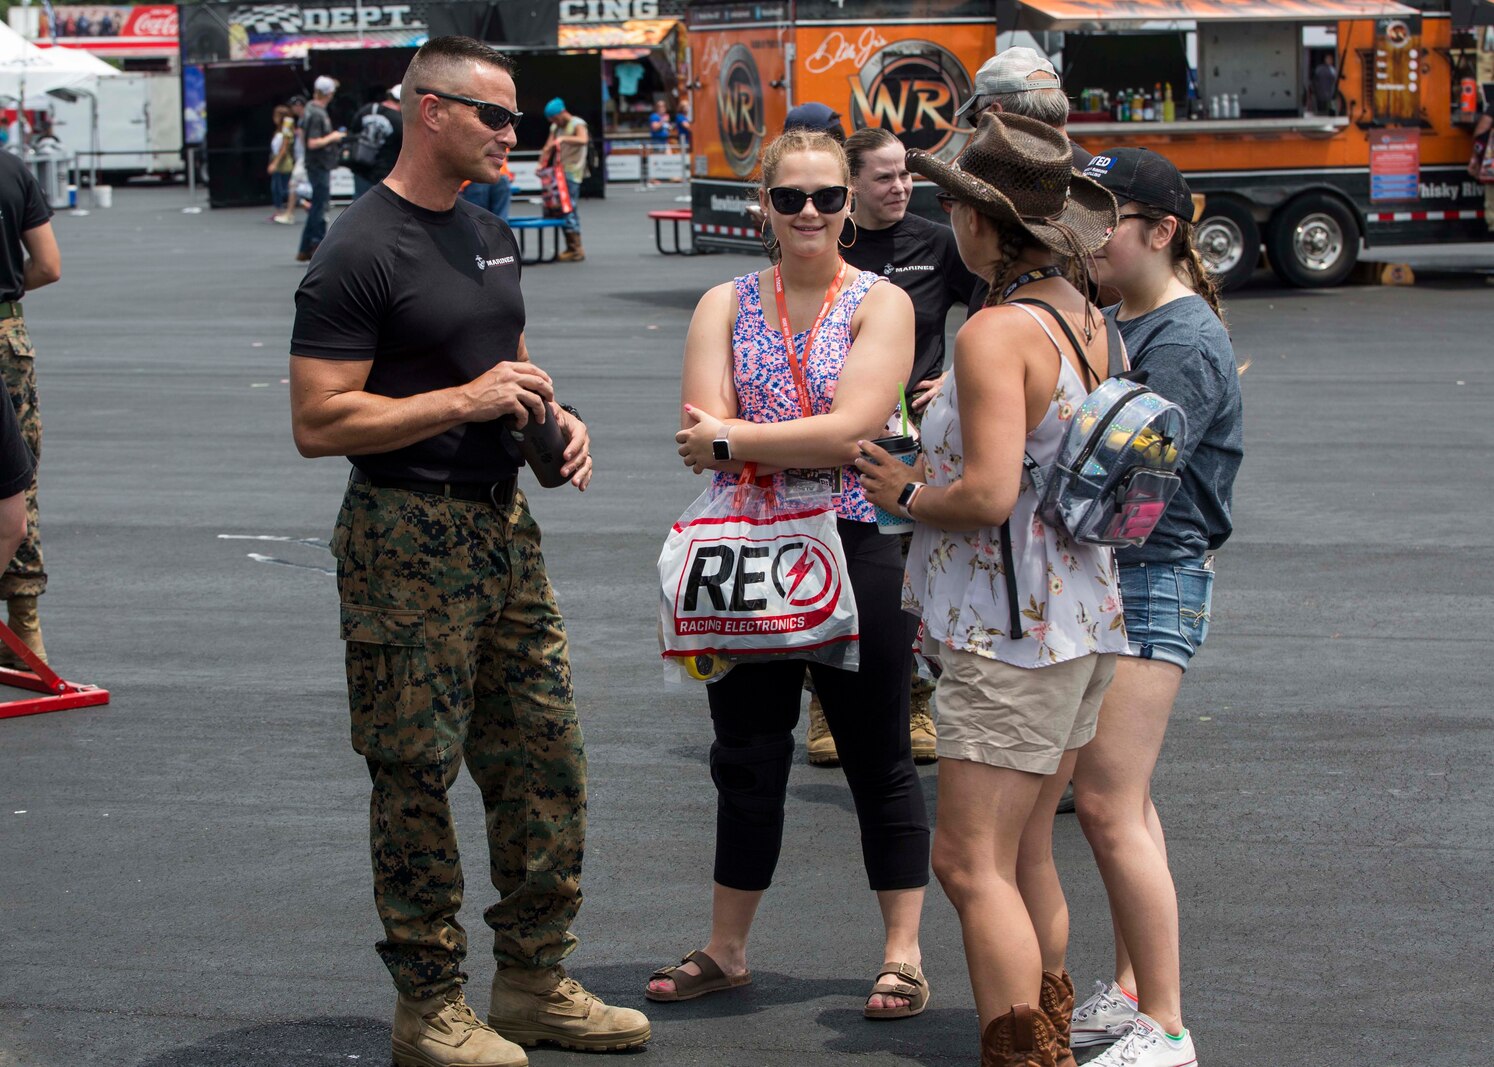 Major Jason G. Ellis, Commanding Officer of Recruiting Station Columbia, speaks to attendants of the Coca-Cola 600 at the Charlotte Motor Speedway on May 26, 2018. The Marines took part in the battles won challenge trailer at the Coca-Cola 600 NASCAR race to spread awareness of the opportunities that the Marine Corps can provide. (U.S. Marine Corps photo by Lance Cpl. Jack A. E. Rigsby)